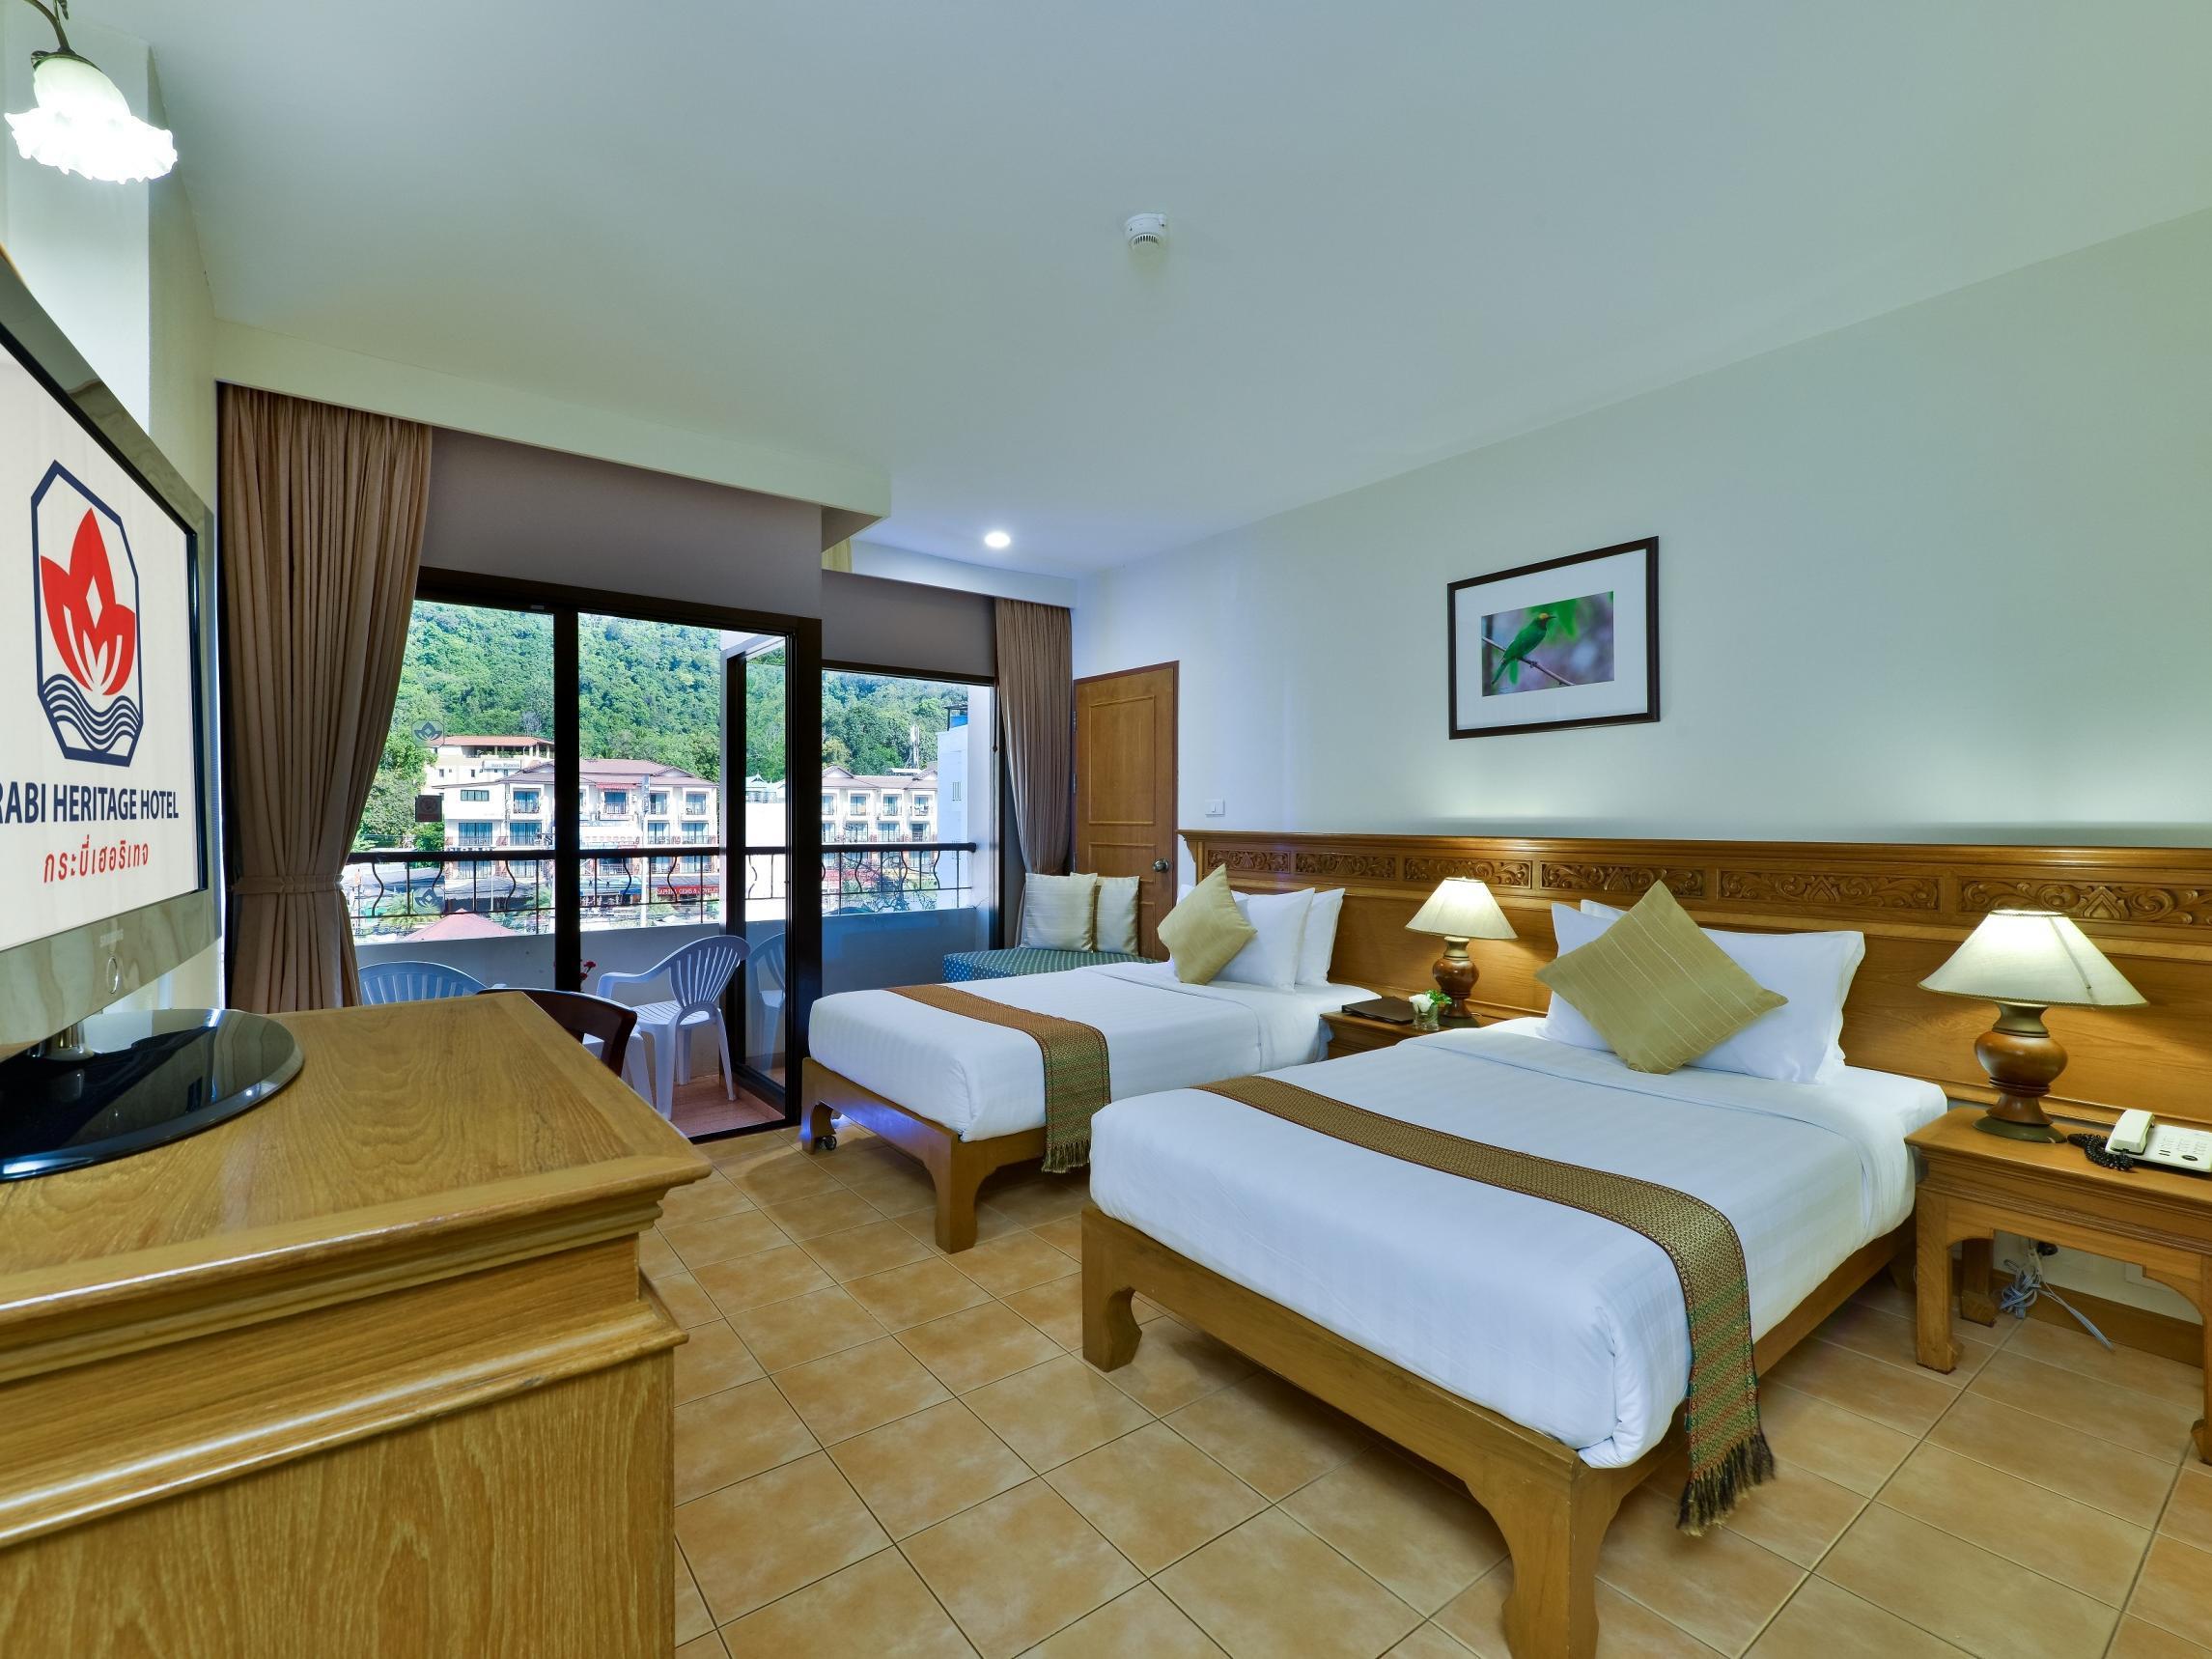 Krabi Heritage Hotel Thailand FAQ 2016, What facilities are there in Krabi Heritage Hotel Thailand 2016, What Languages Spoken are Supported in Krabi Heritage Hotel Thailand 2016, Which payment cards are accepted in Krabi Heritage Hotel Thailand , Thailand Krabi Heritage Hotel room facilities and services Q&A 2016, Thailand Krabi Heritage Hotel online booking services 2016, Thailand Krabi Heritage Hotel address 2016, Thailand Krabi Heritage Hotel telephone number 2016,Thailand Krabi Heritage Hotel map 2016, Thailand Krabi Heritage Hotel traffic guide 2016, how to go Thailand Krabi Heritage Hotel, Thailand Krabi Heritage Hotel booking online 2016, Thailand Krabi Heritage Hotel room types 2016.